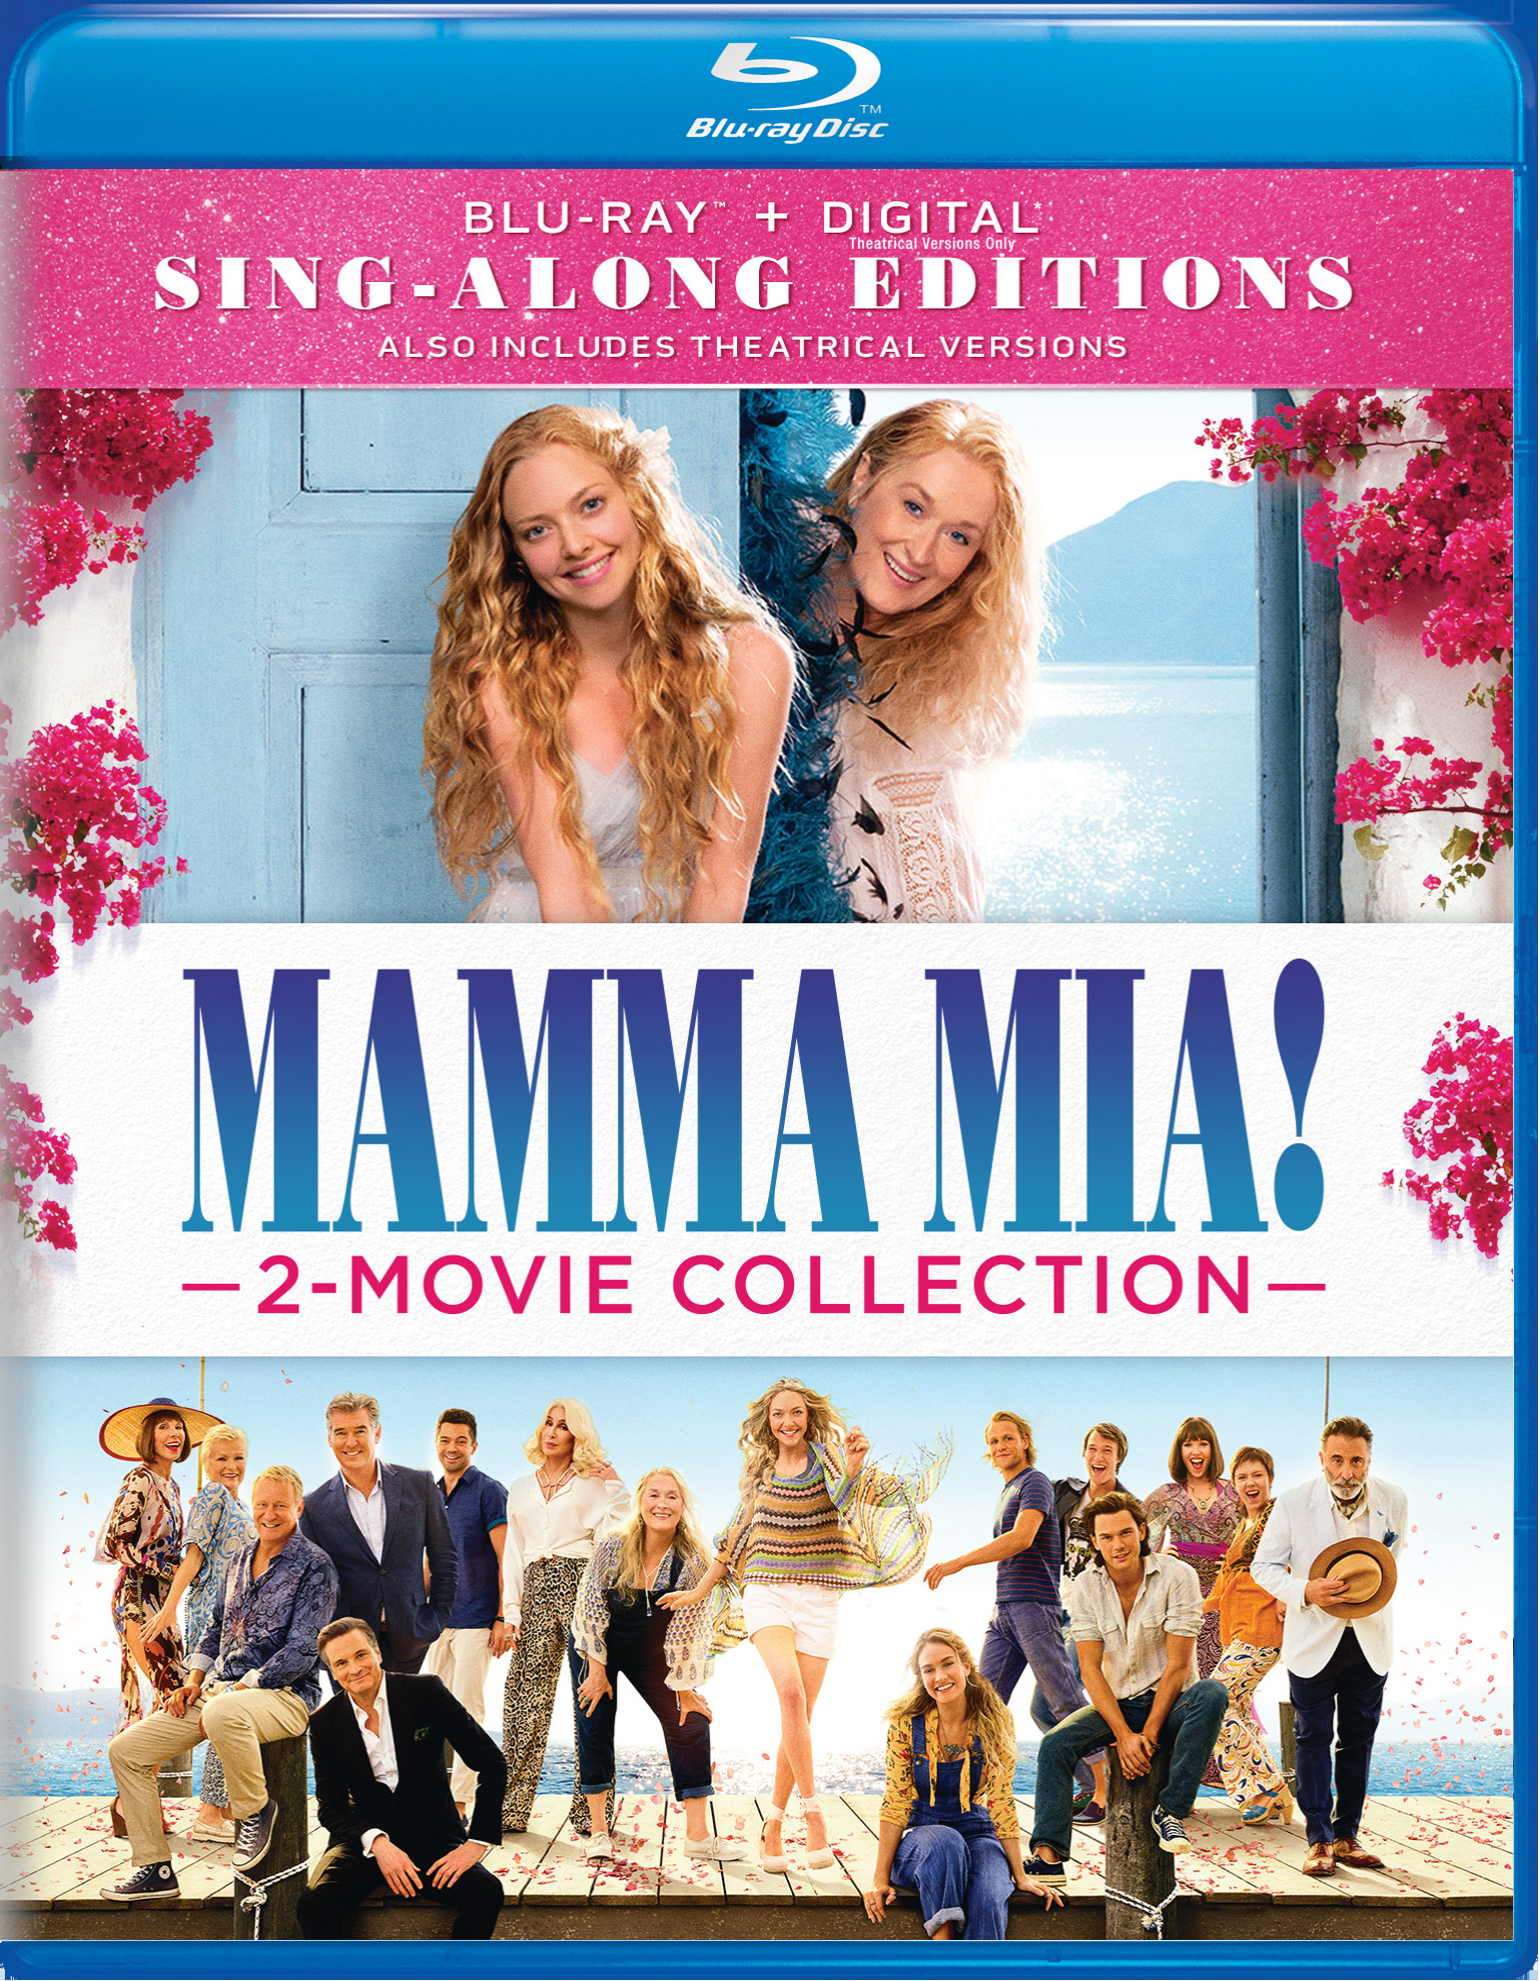 Mamma Mia!: 2-movie Collection (Sing-Along Edition) - Blu-ray [ 2018 ]  - Musical Movies On Blu-ray - Movies On GRUV